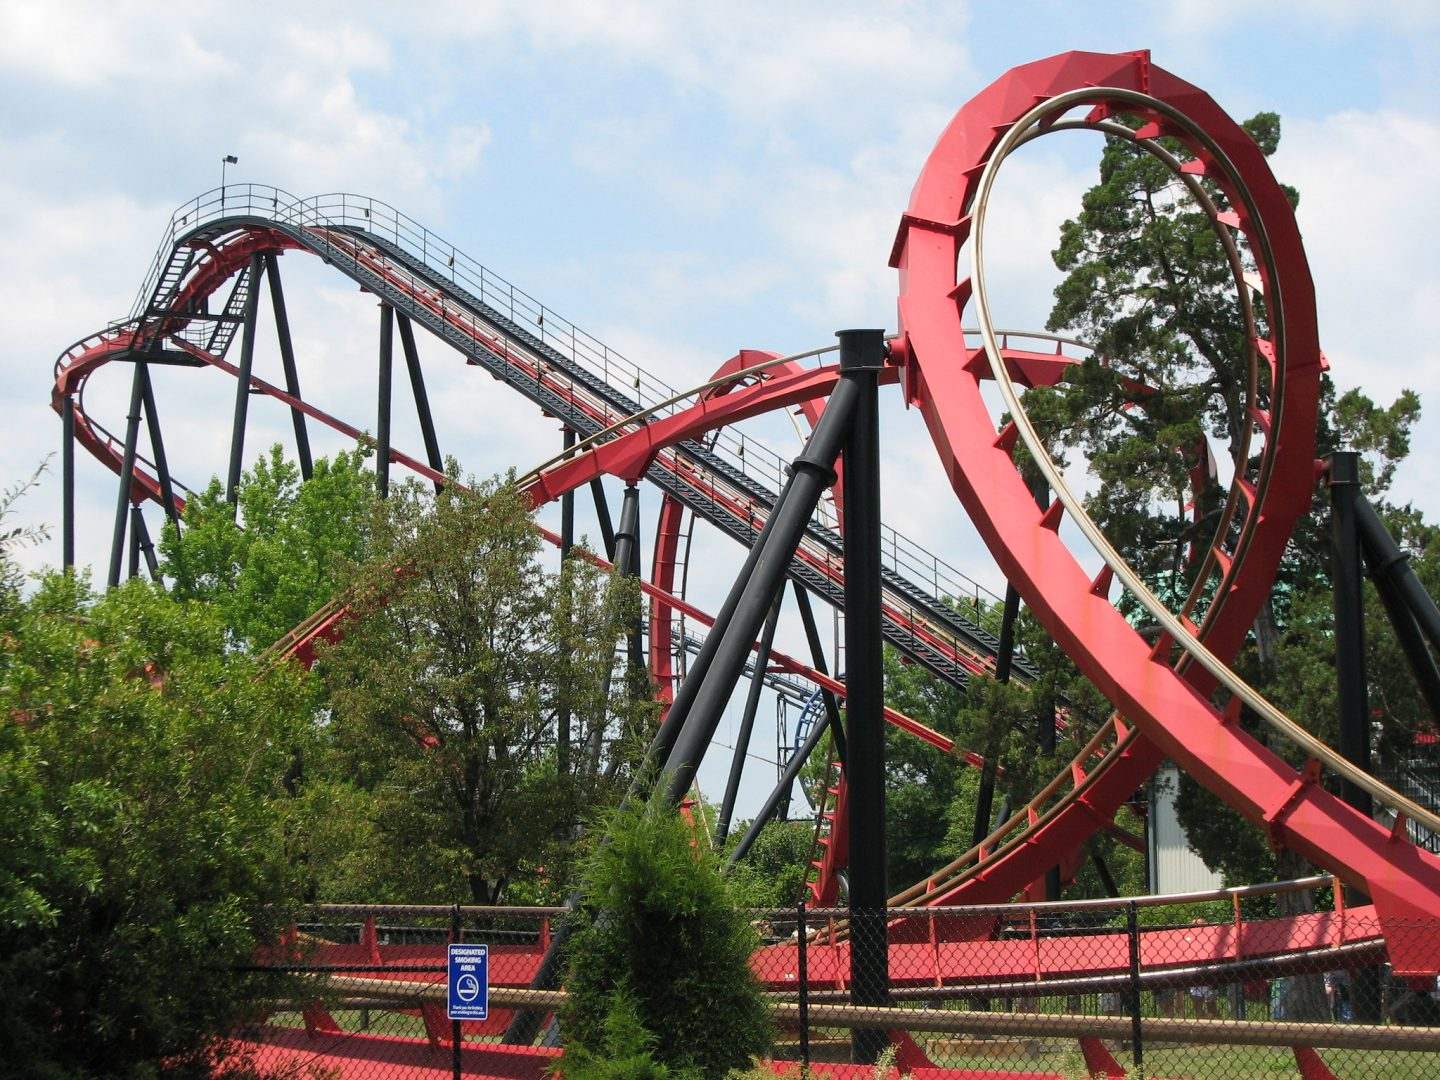 THE 10 BEST Water & Amusement Parks in North Carolina (2023)